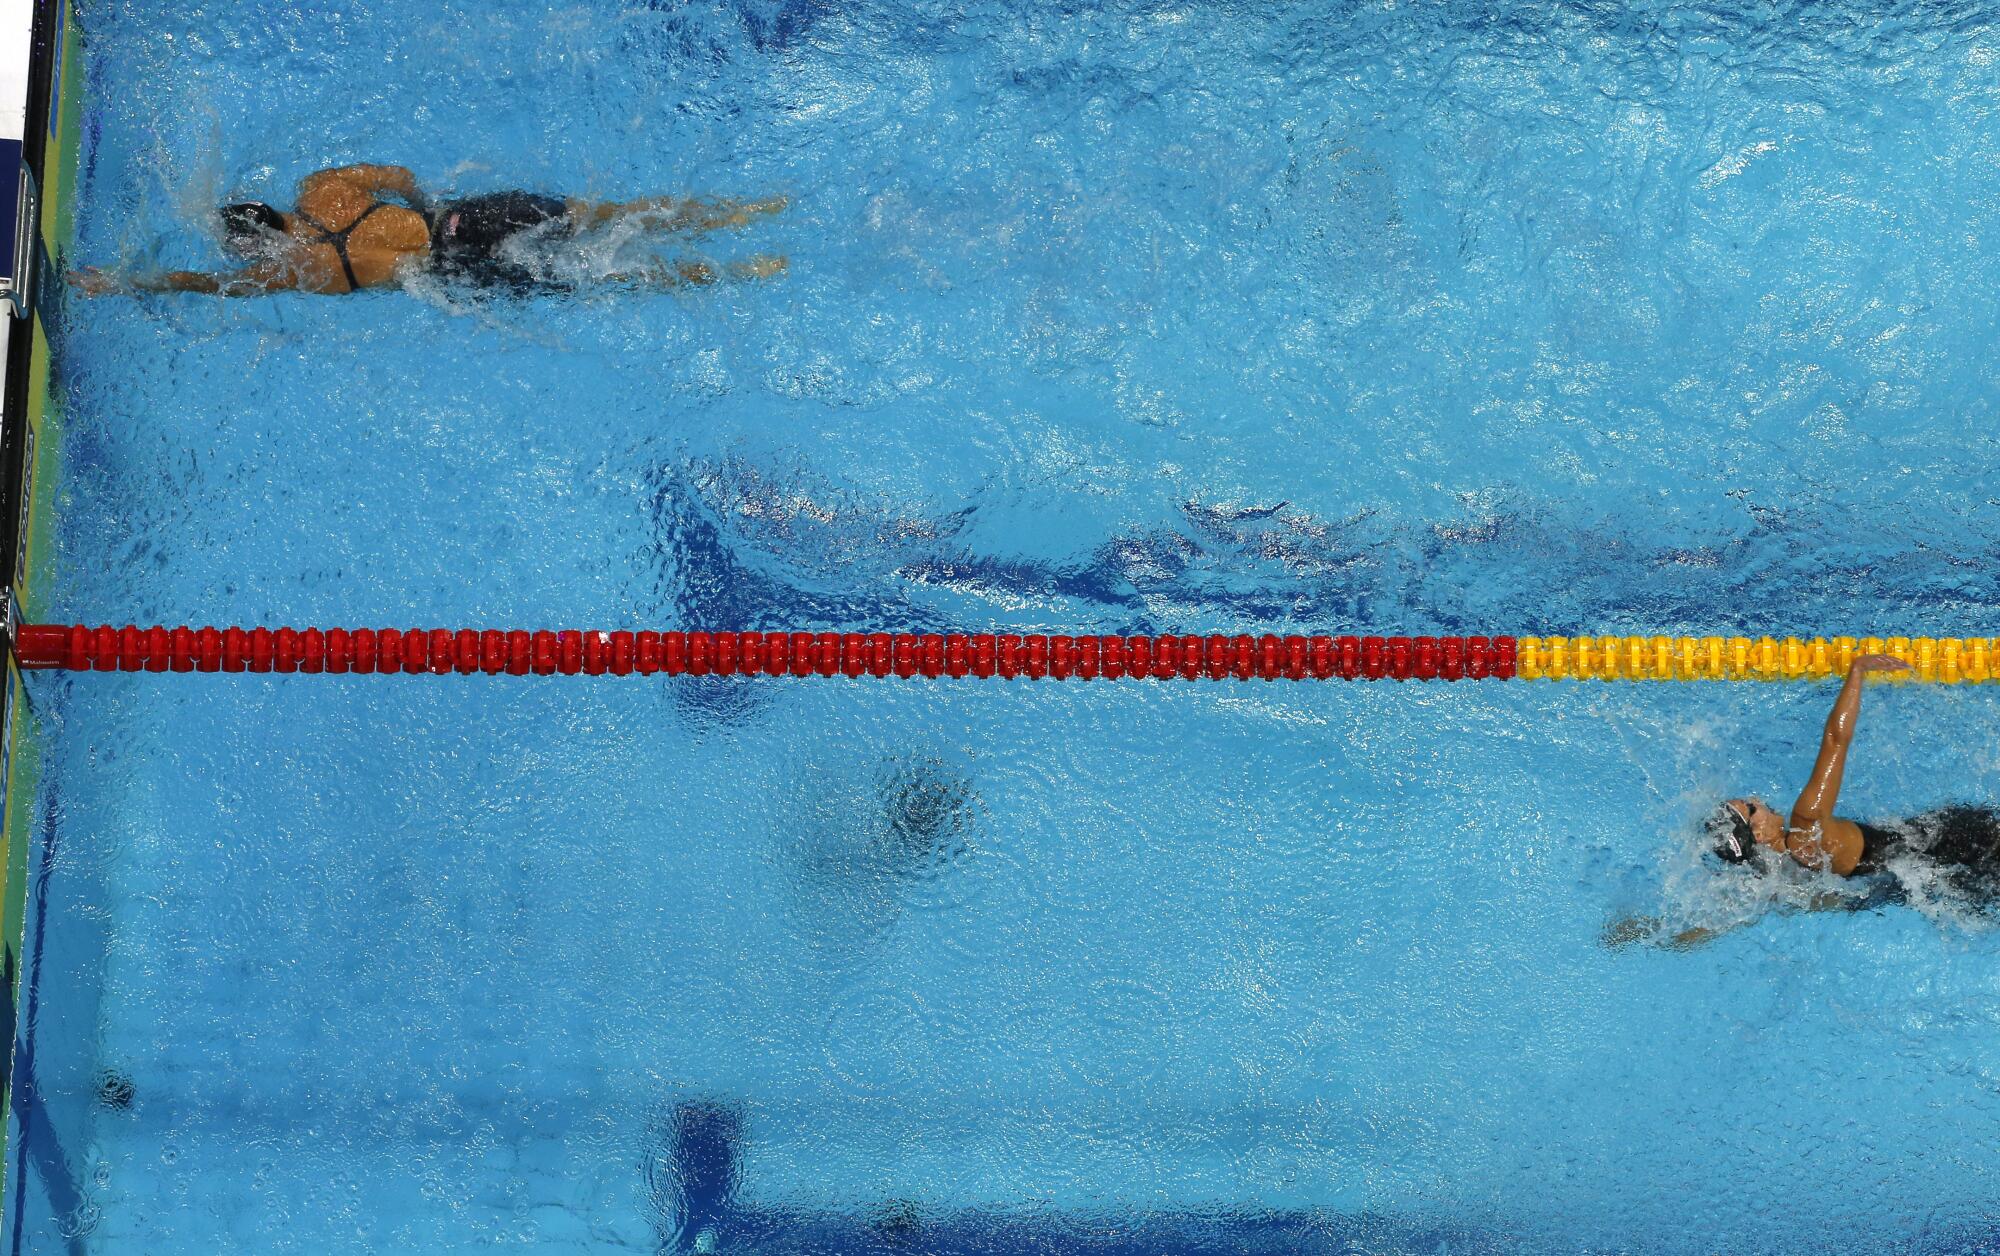 Katie Ledecky, left, finishes the women's 400-meter freestyle final far ahead of her competitors